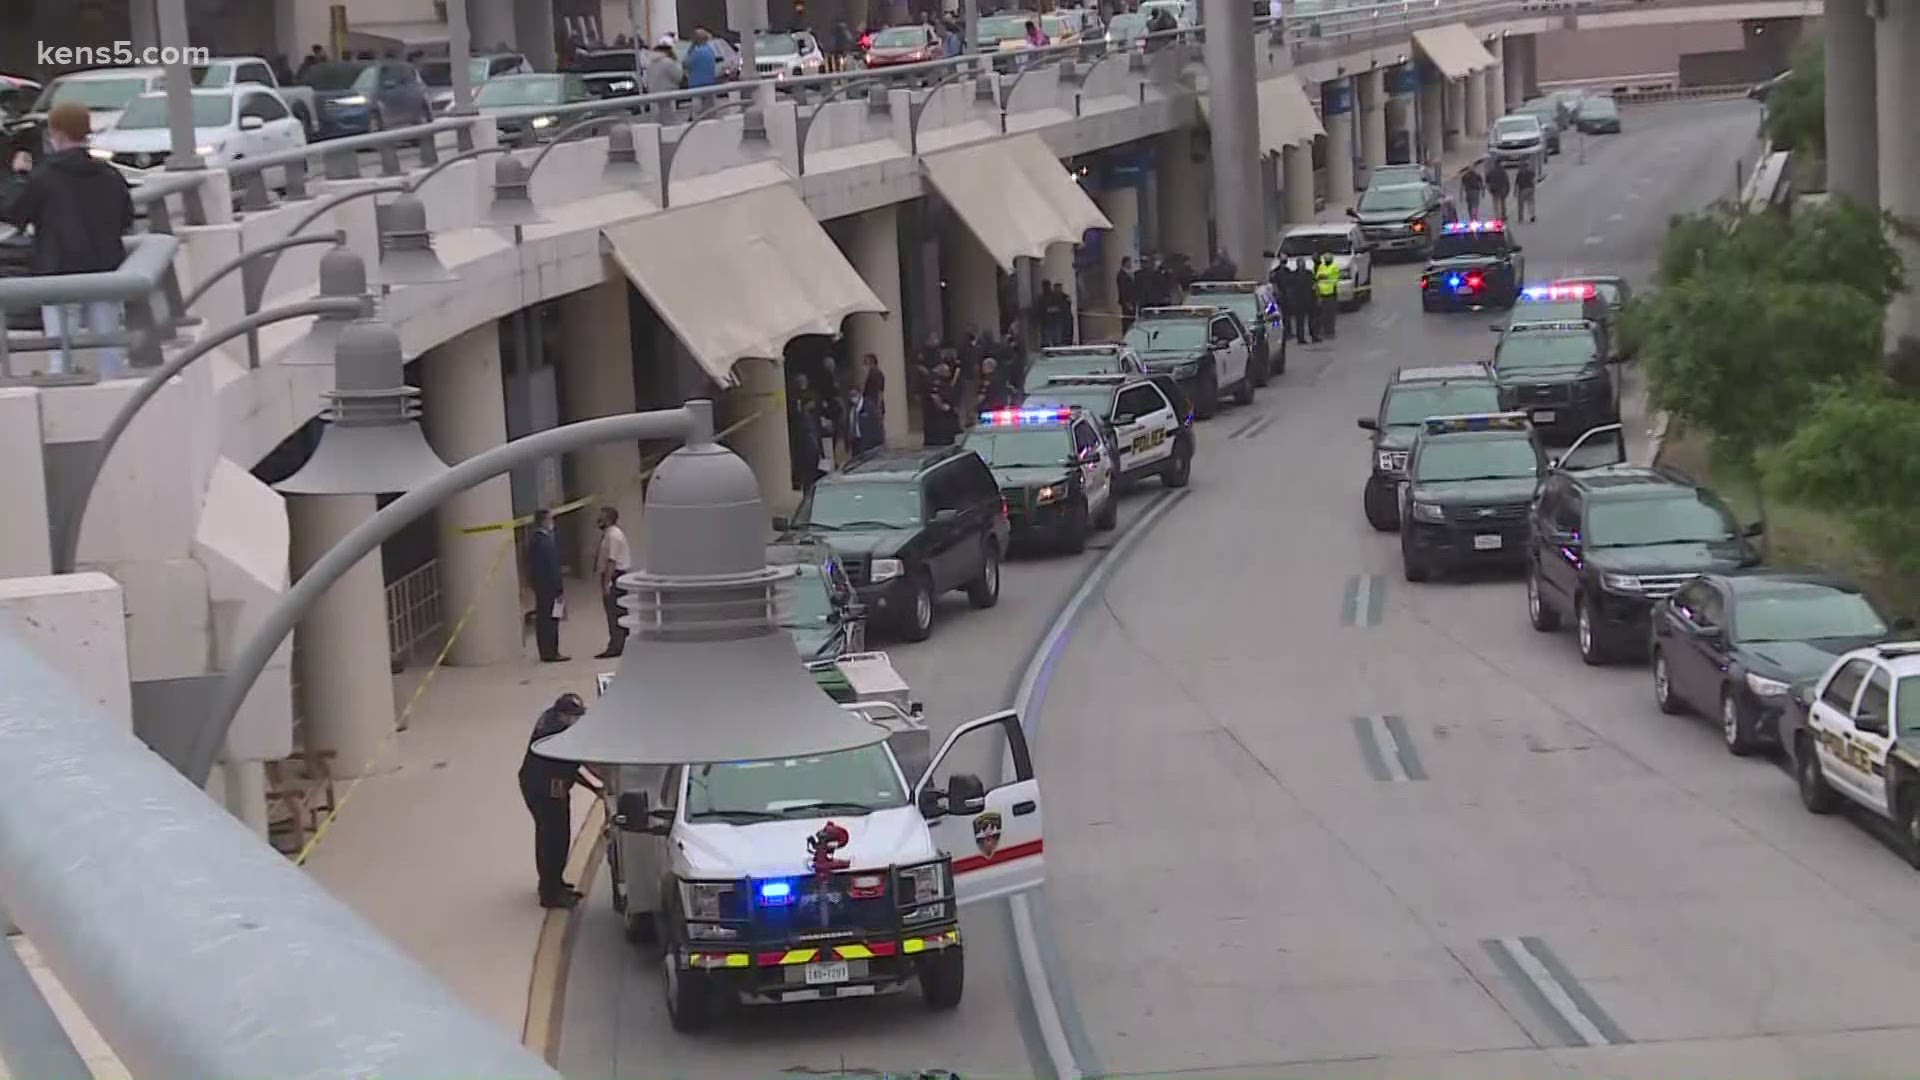 Police say the alleged shooter arrived to the arrivals terminal and began firing rounds "indiscriminately."